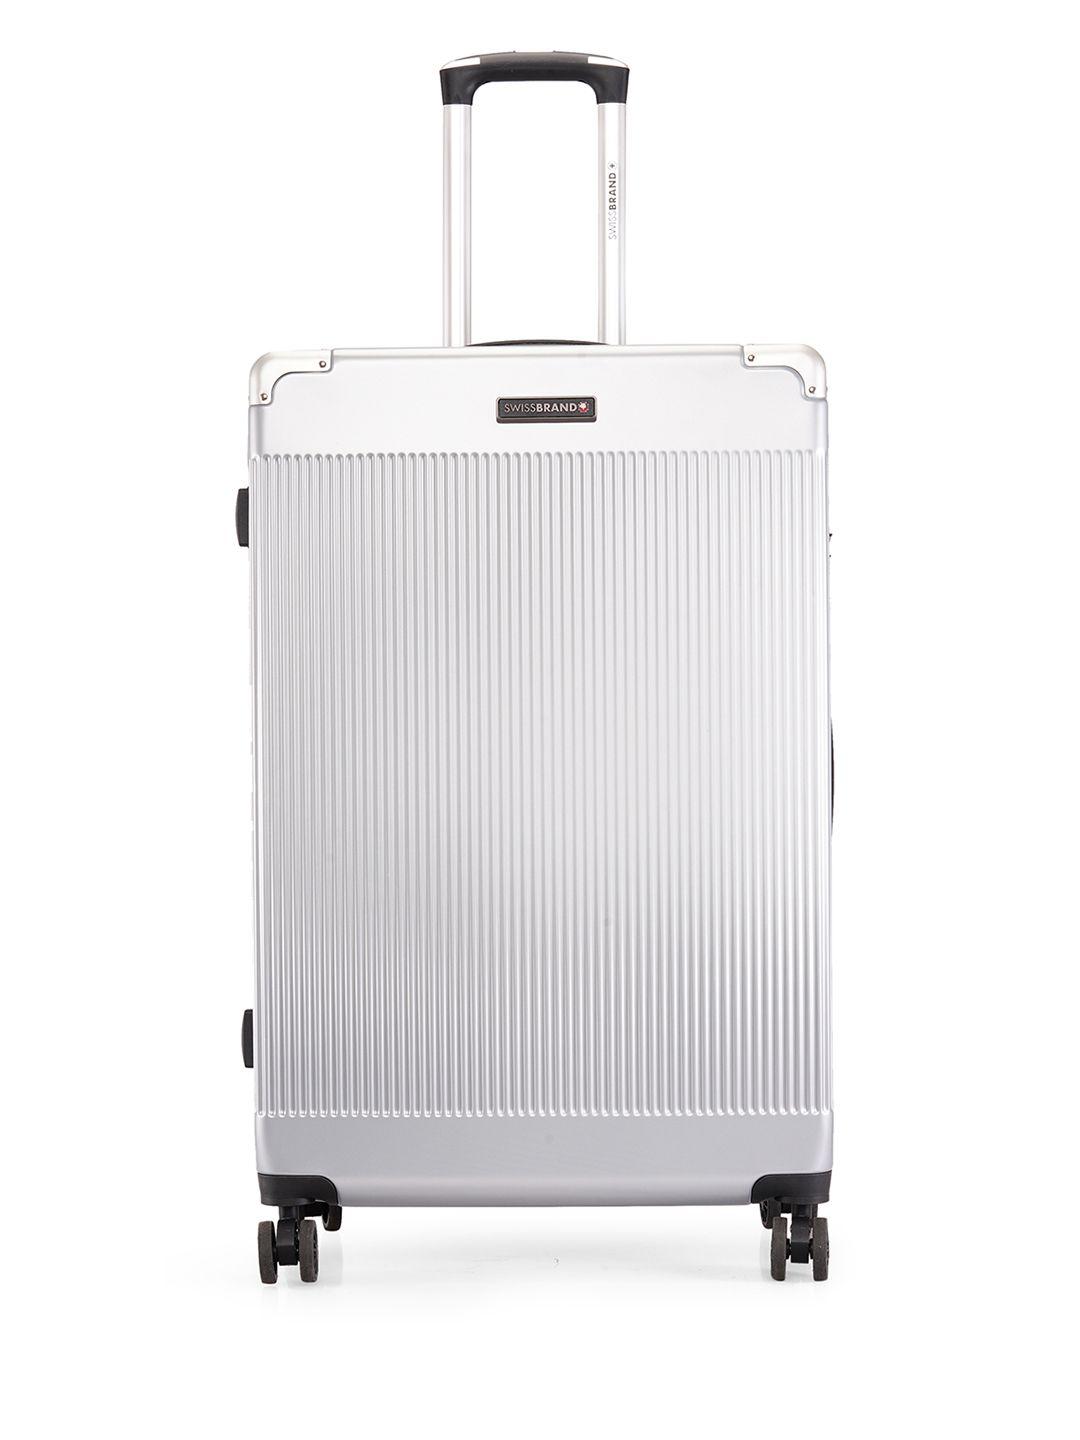 swiss brand unisex silver-toned textured geneve hard-sided large trolley suitcase